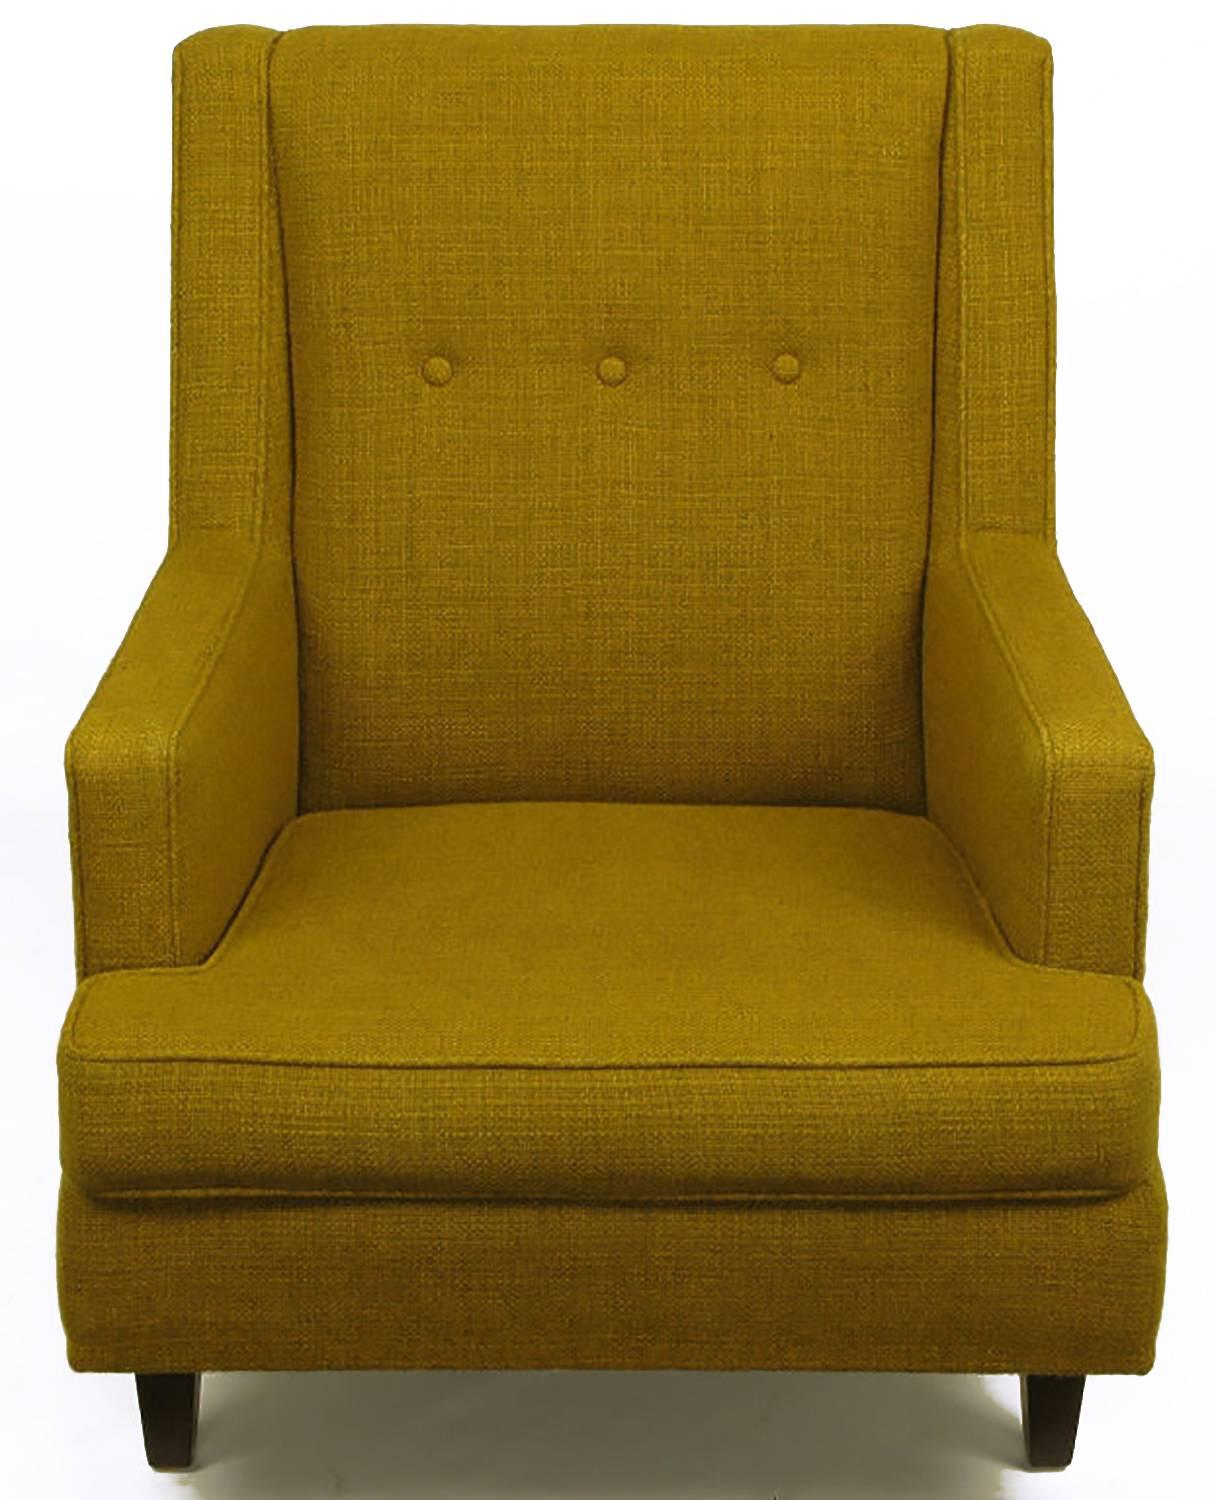 Edward Wormley for Dunbar lounge chair with unique setback front legs, and clad in moss green wool upholstery. Extremely comfortable with deep seat cushion and slight angle of the three button back. Walnut wood legs and original shipping label